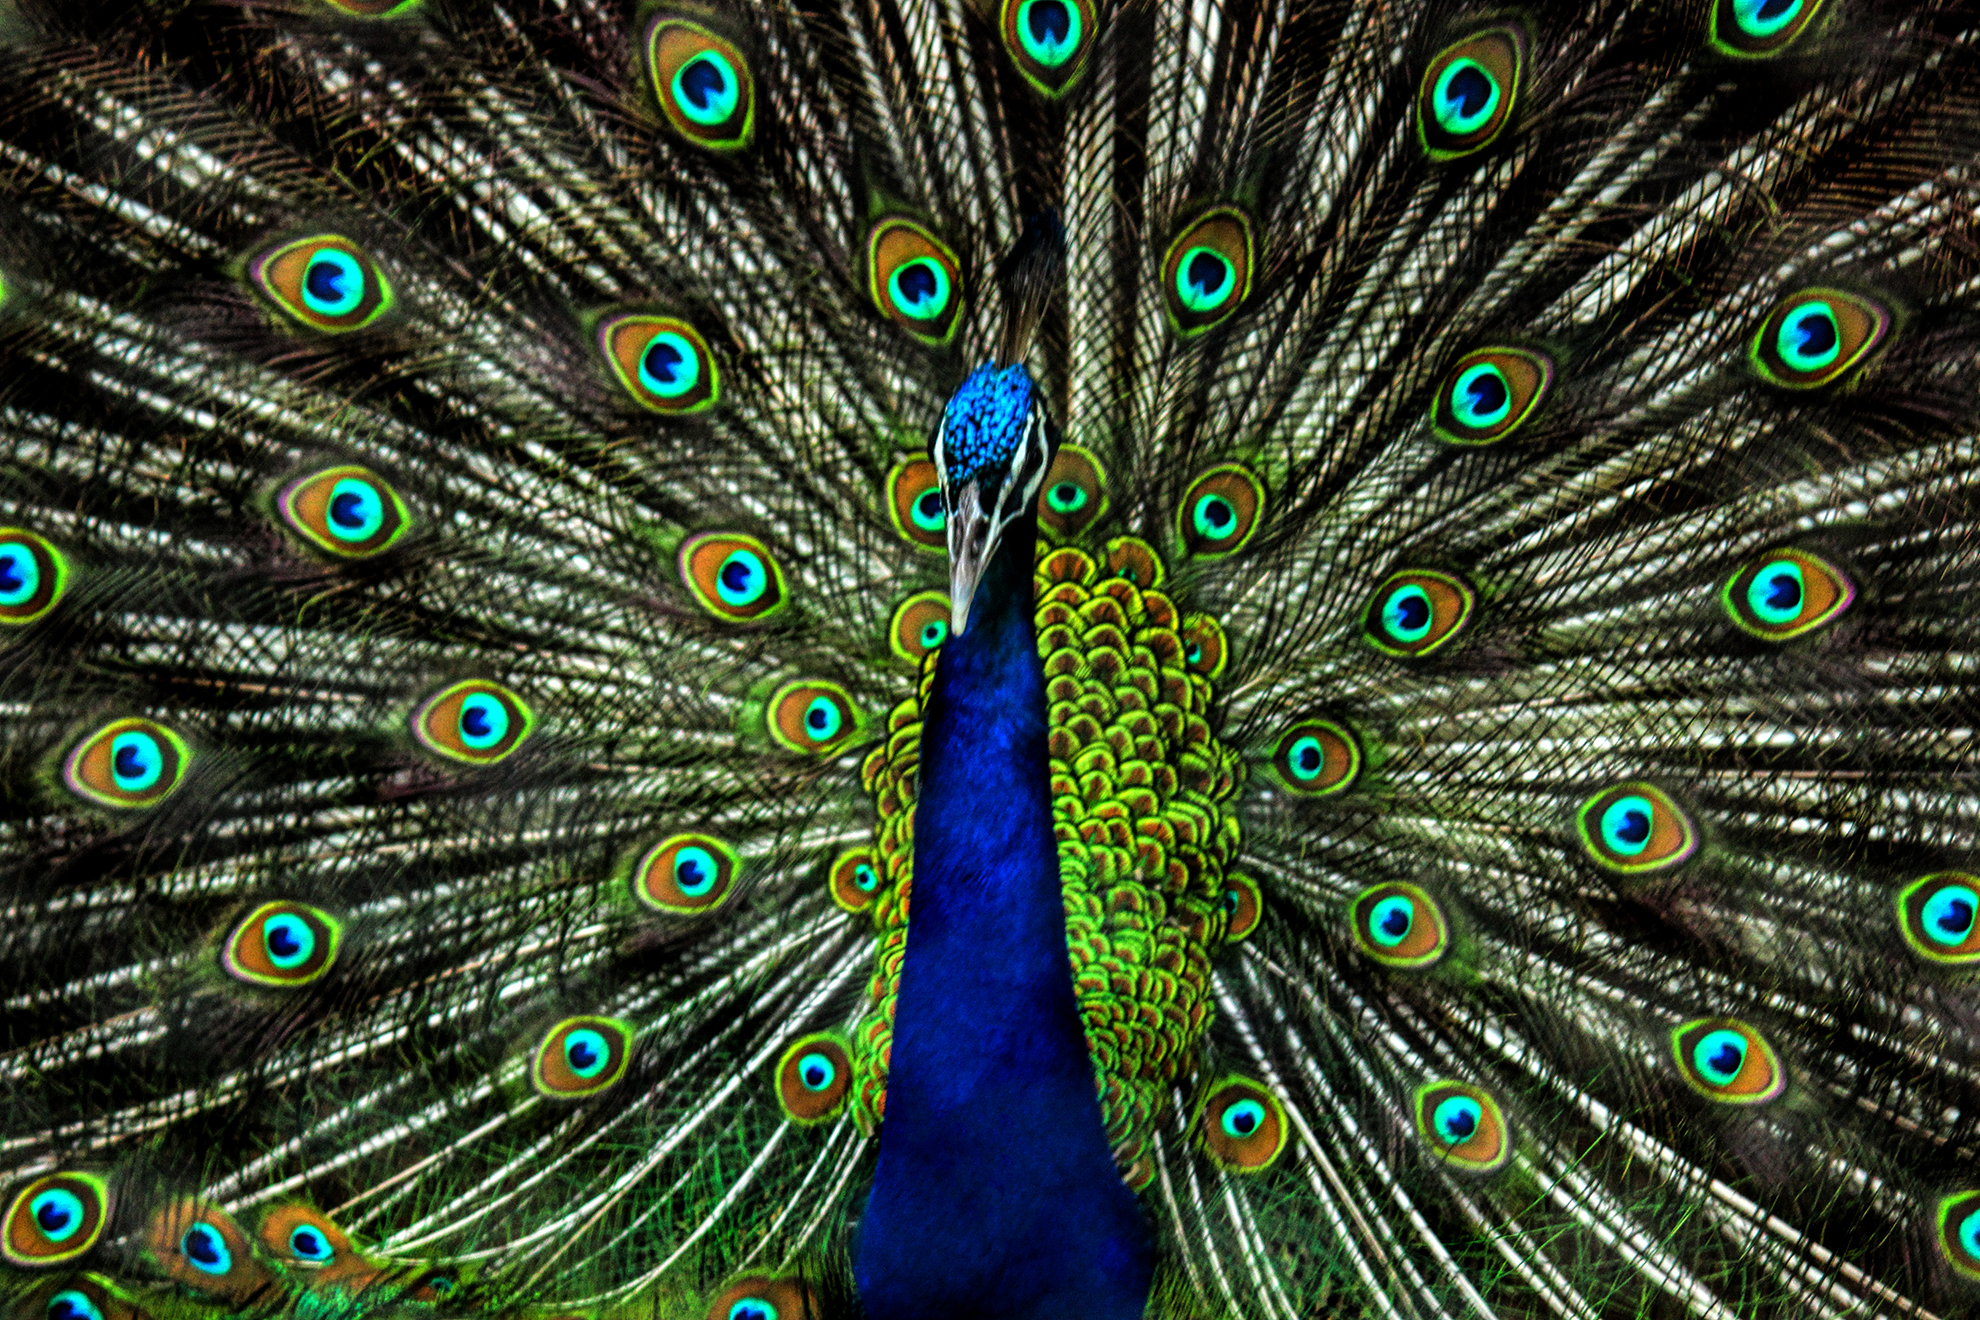 File:Peacock feathers close.jpg - Wikimedia Commons